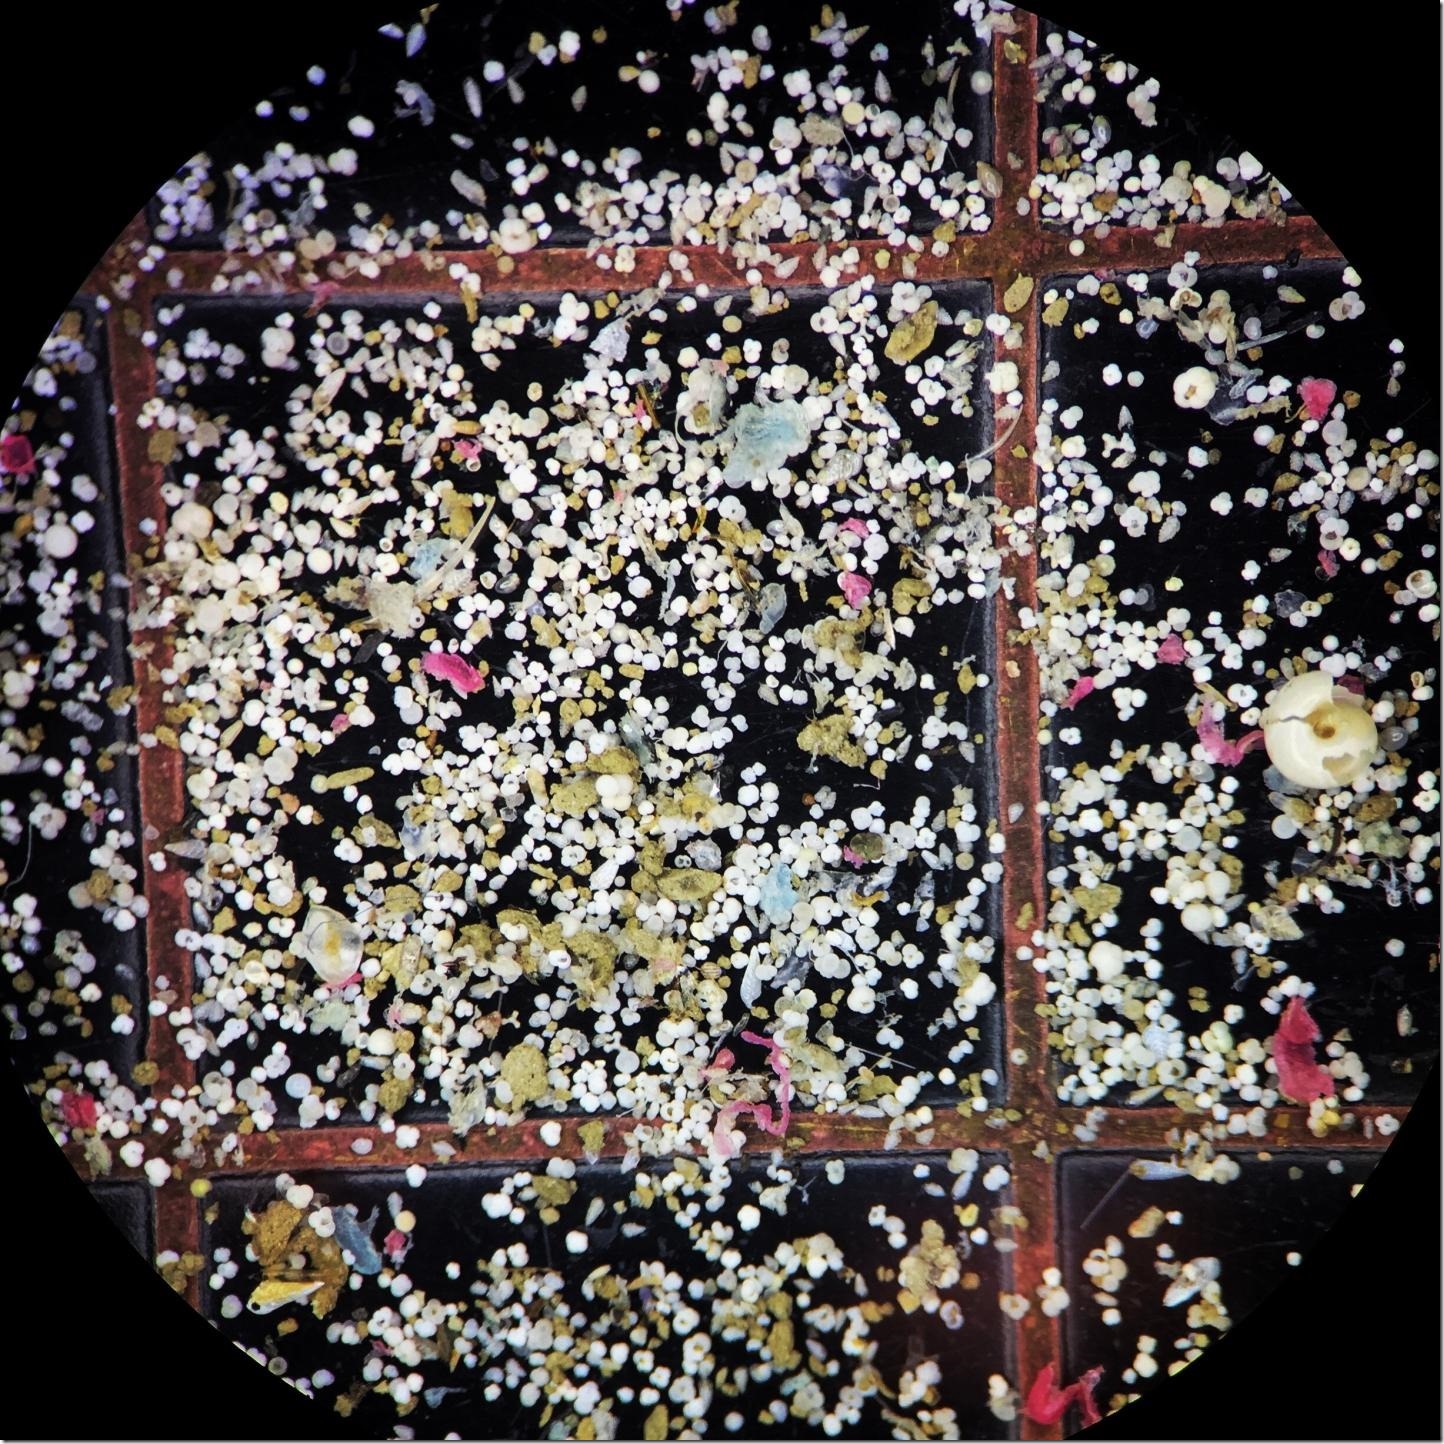 IMAGE: These colorful spots are tiny foraminifera shells taken from the mud of core samples as seen under a microscope. Credit: NOAA